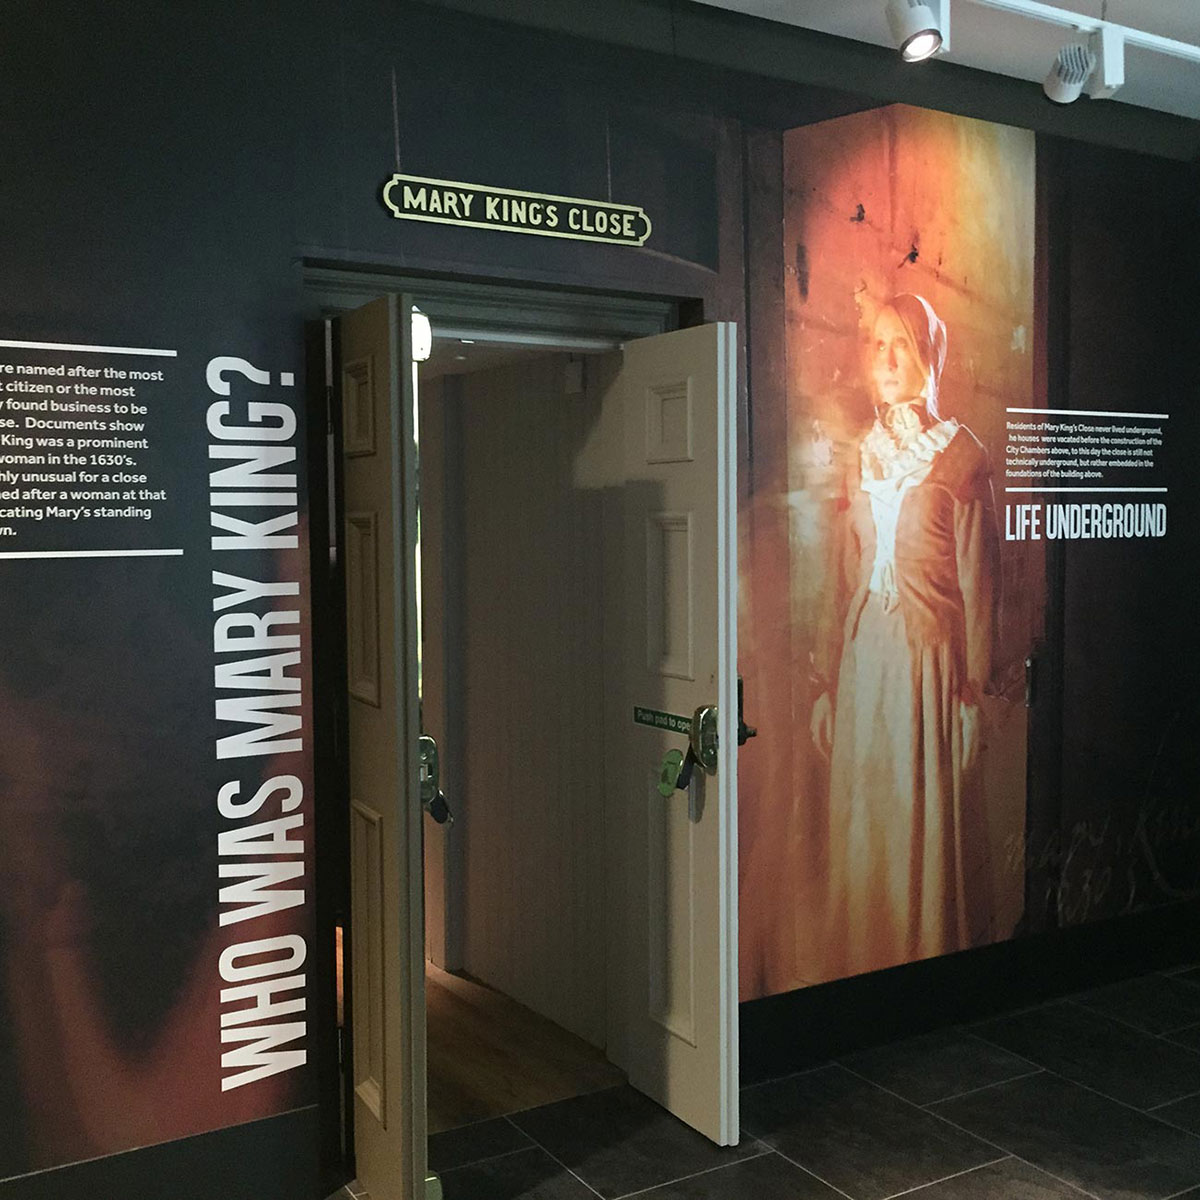 mary kings close entrance with information and images on the wall and an open door